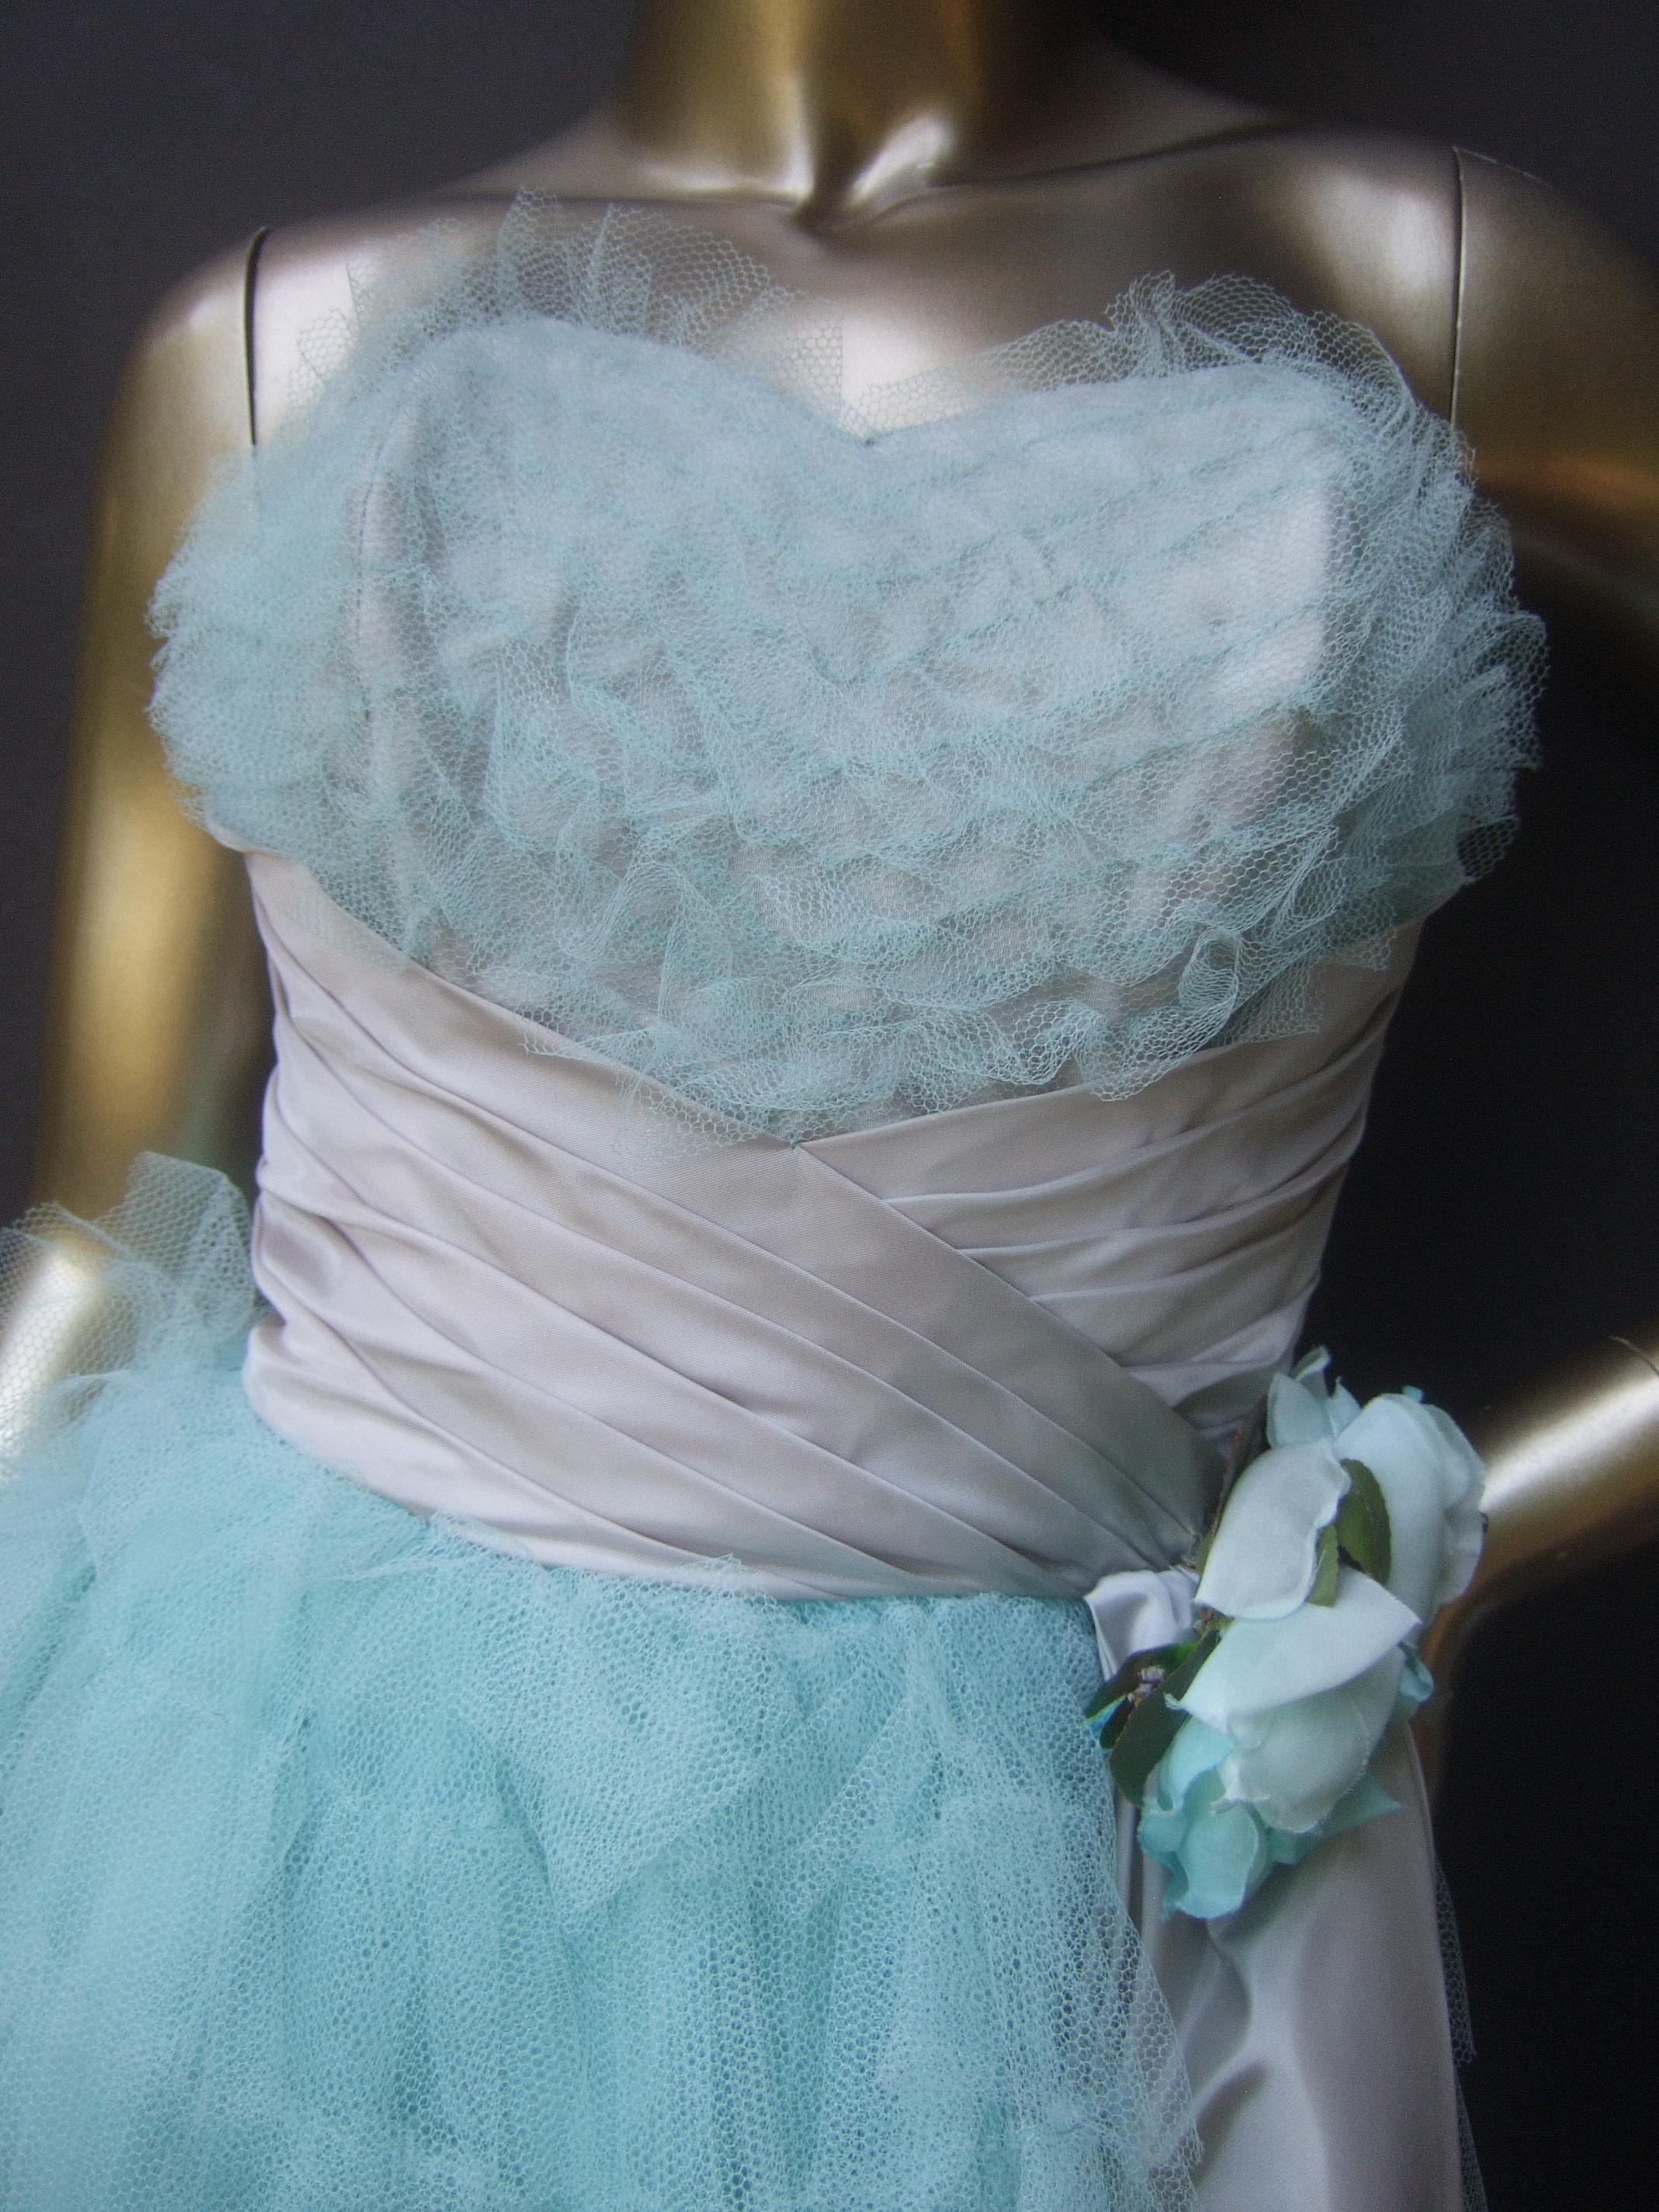 Saks Fifth Avenue Frothy Robin's Egg Pale Blue Tulle Dress c 1950s  4